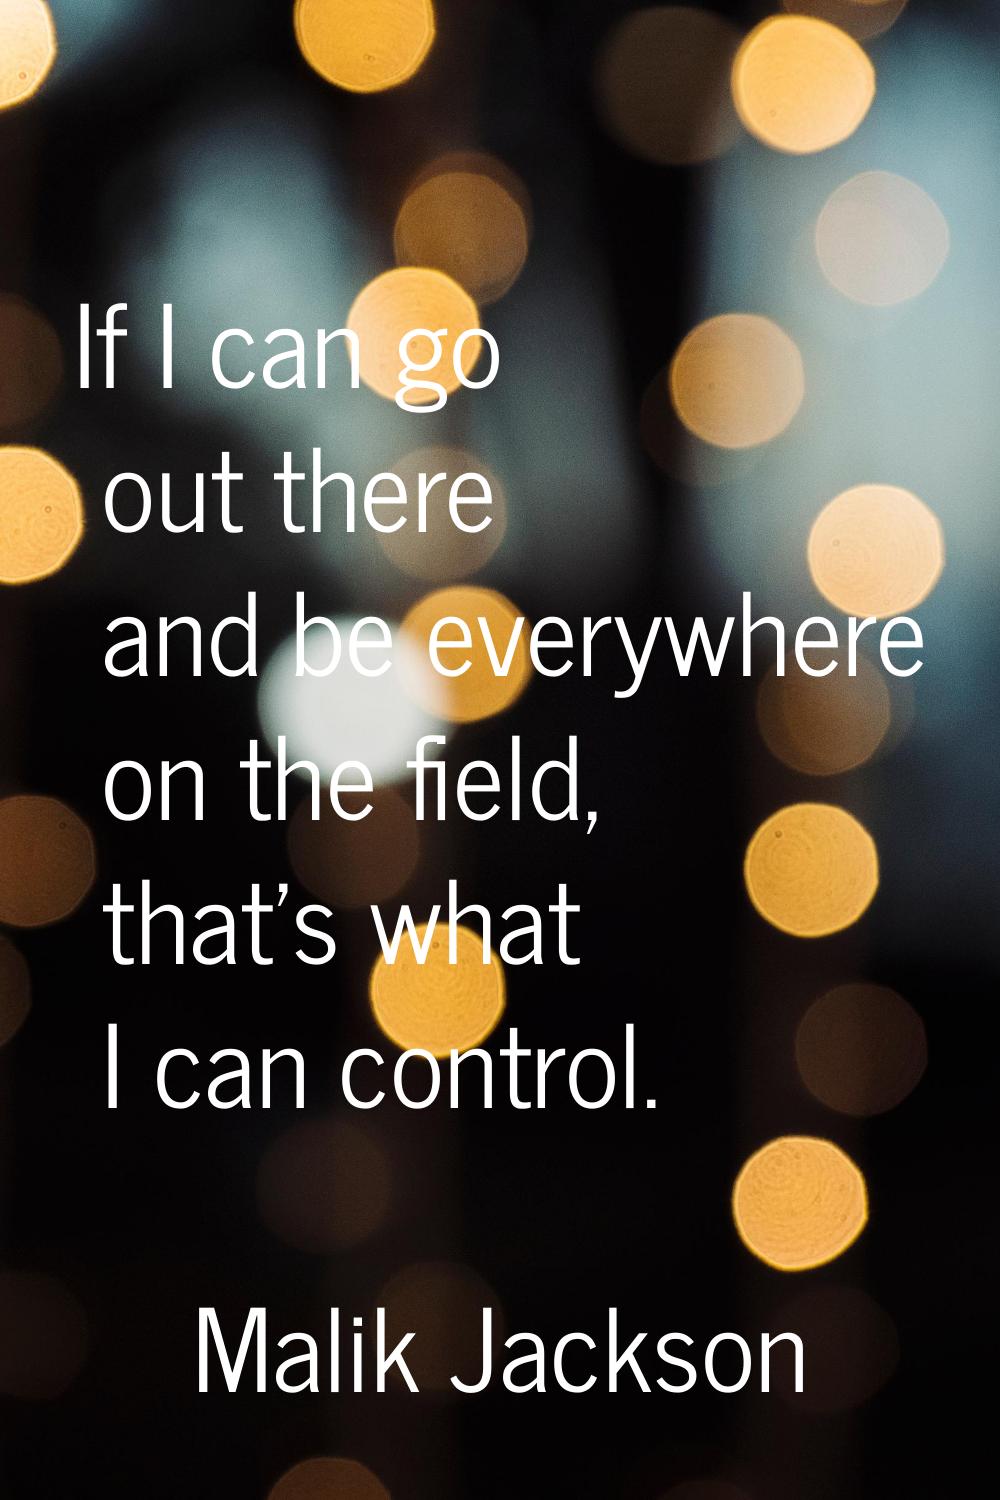 If I can go out there and be everywhere on the field, that's what I can control.